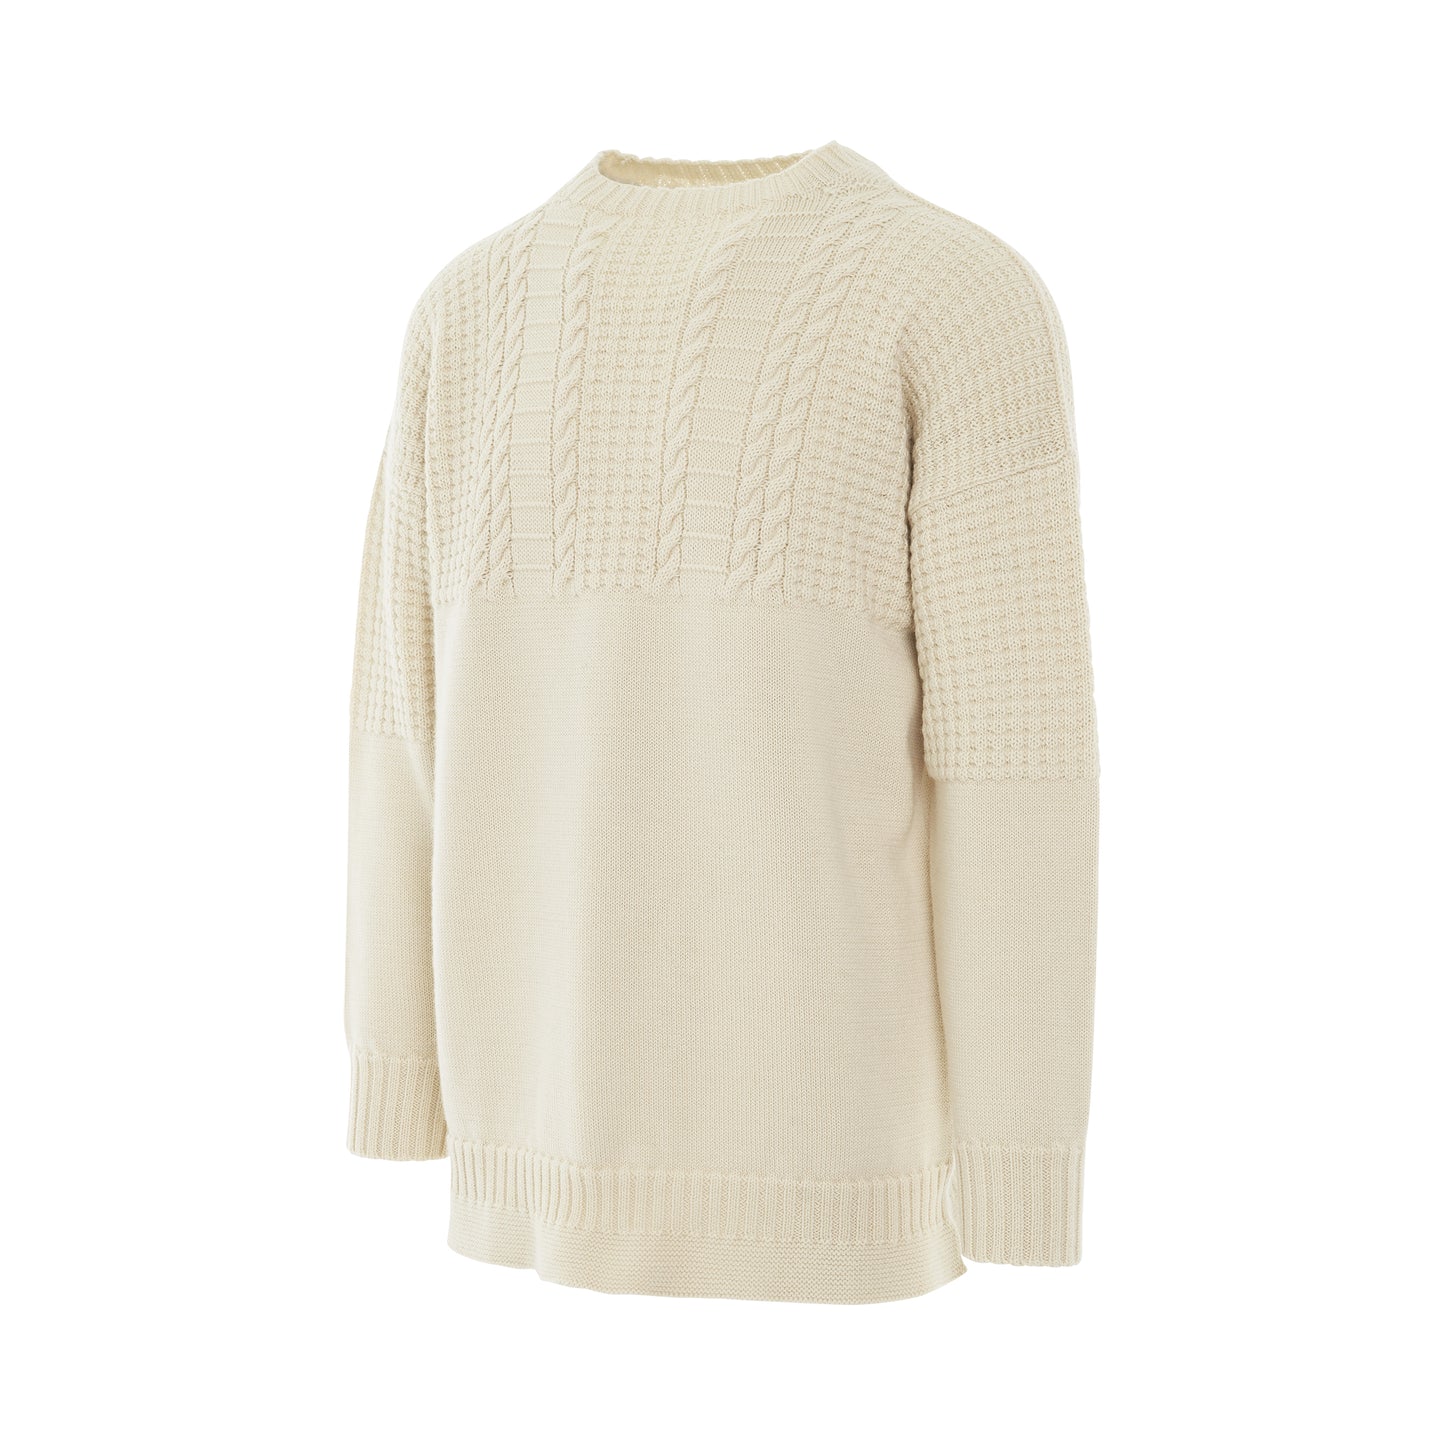 Knit Long Sleeve Sweater in Off White